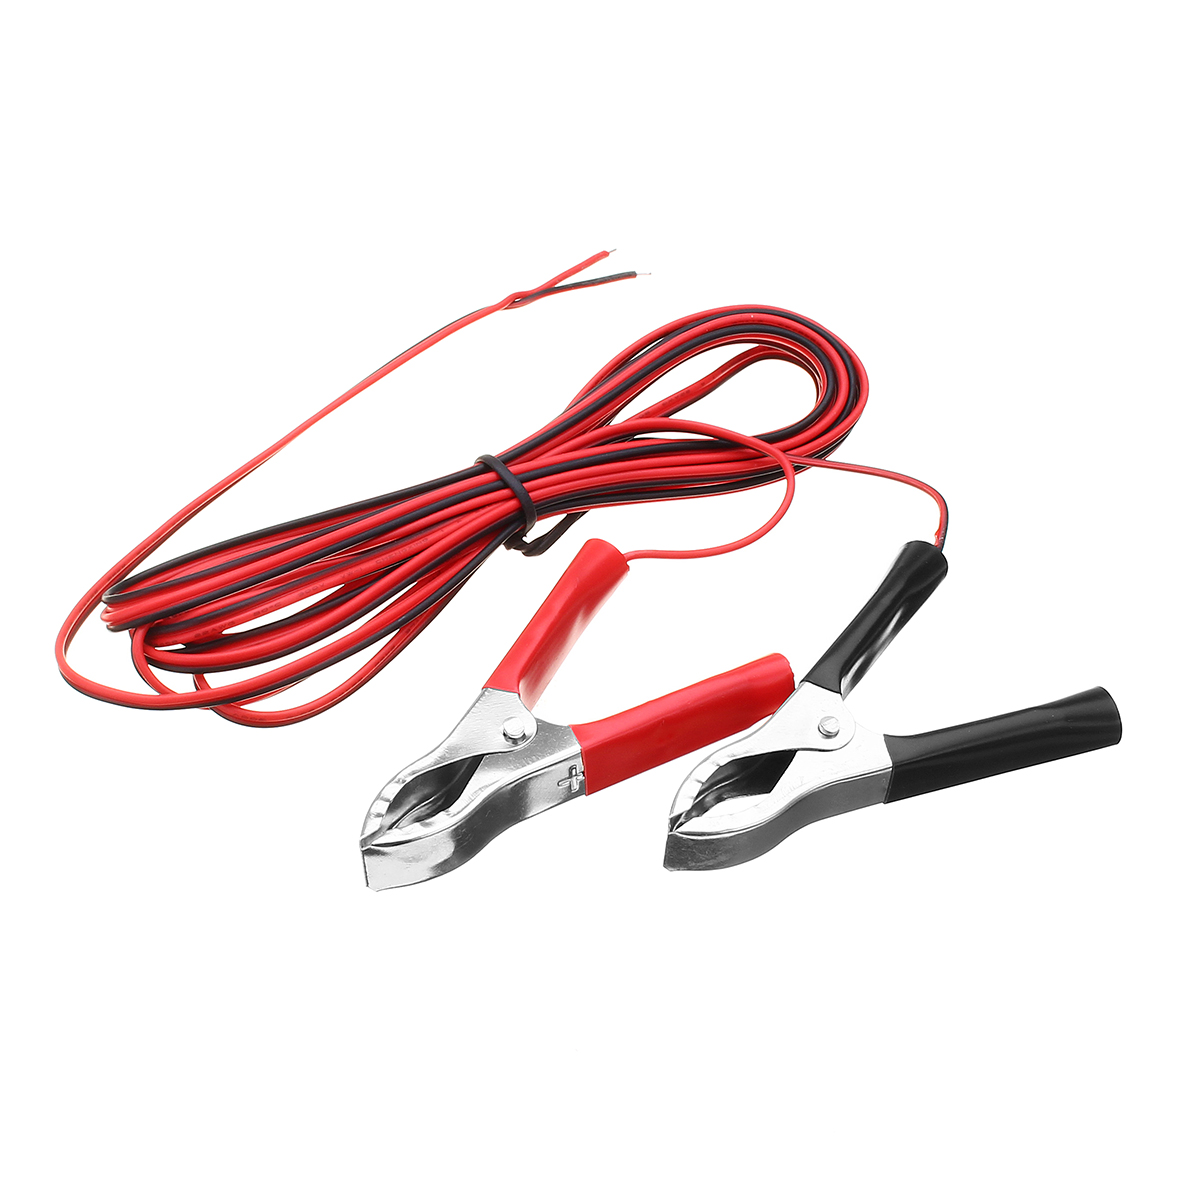 One Pair of 3m Length 3A Red+Black Color Alligator Clip Wiring for Solar Panel 6